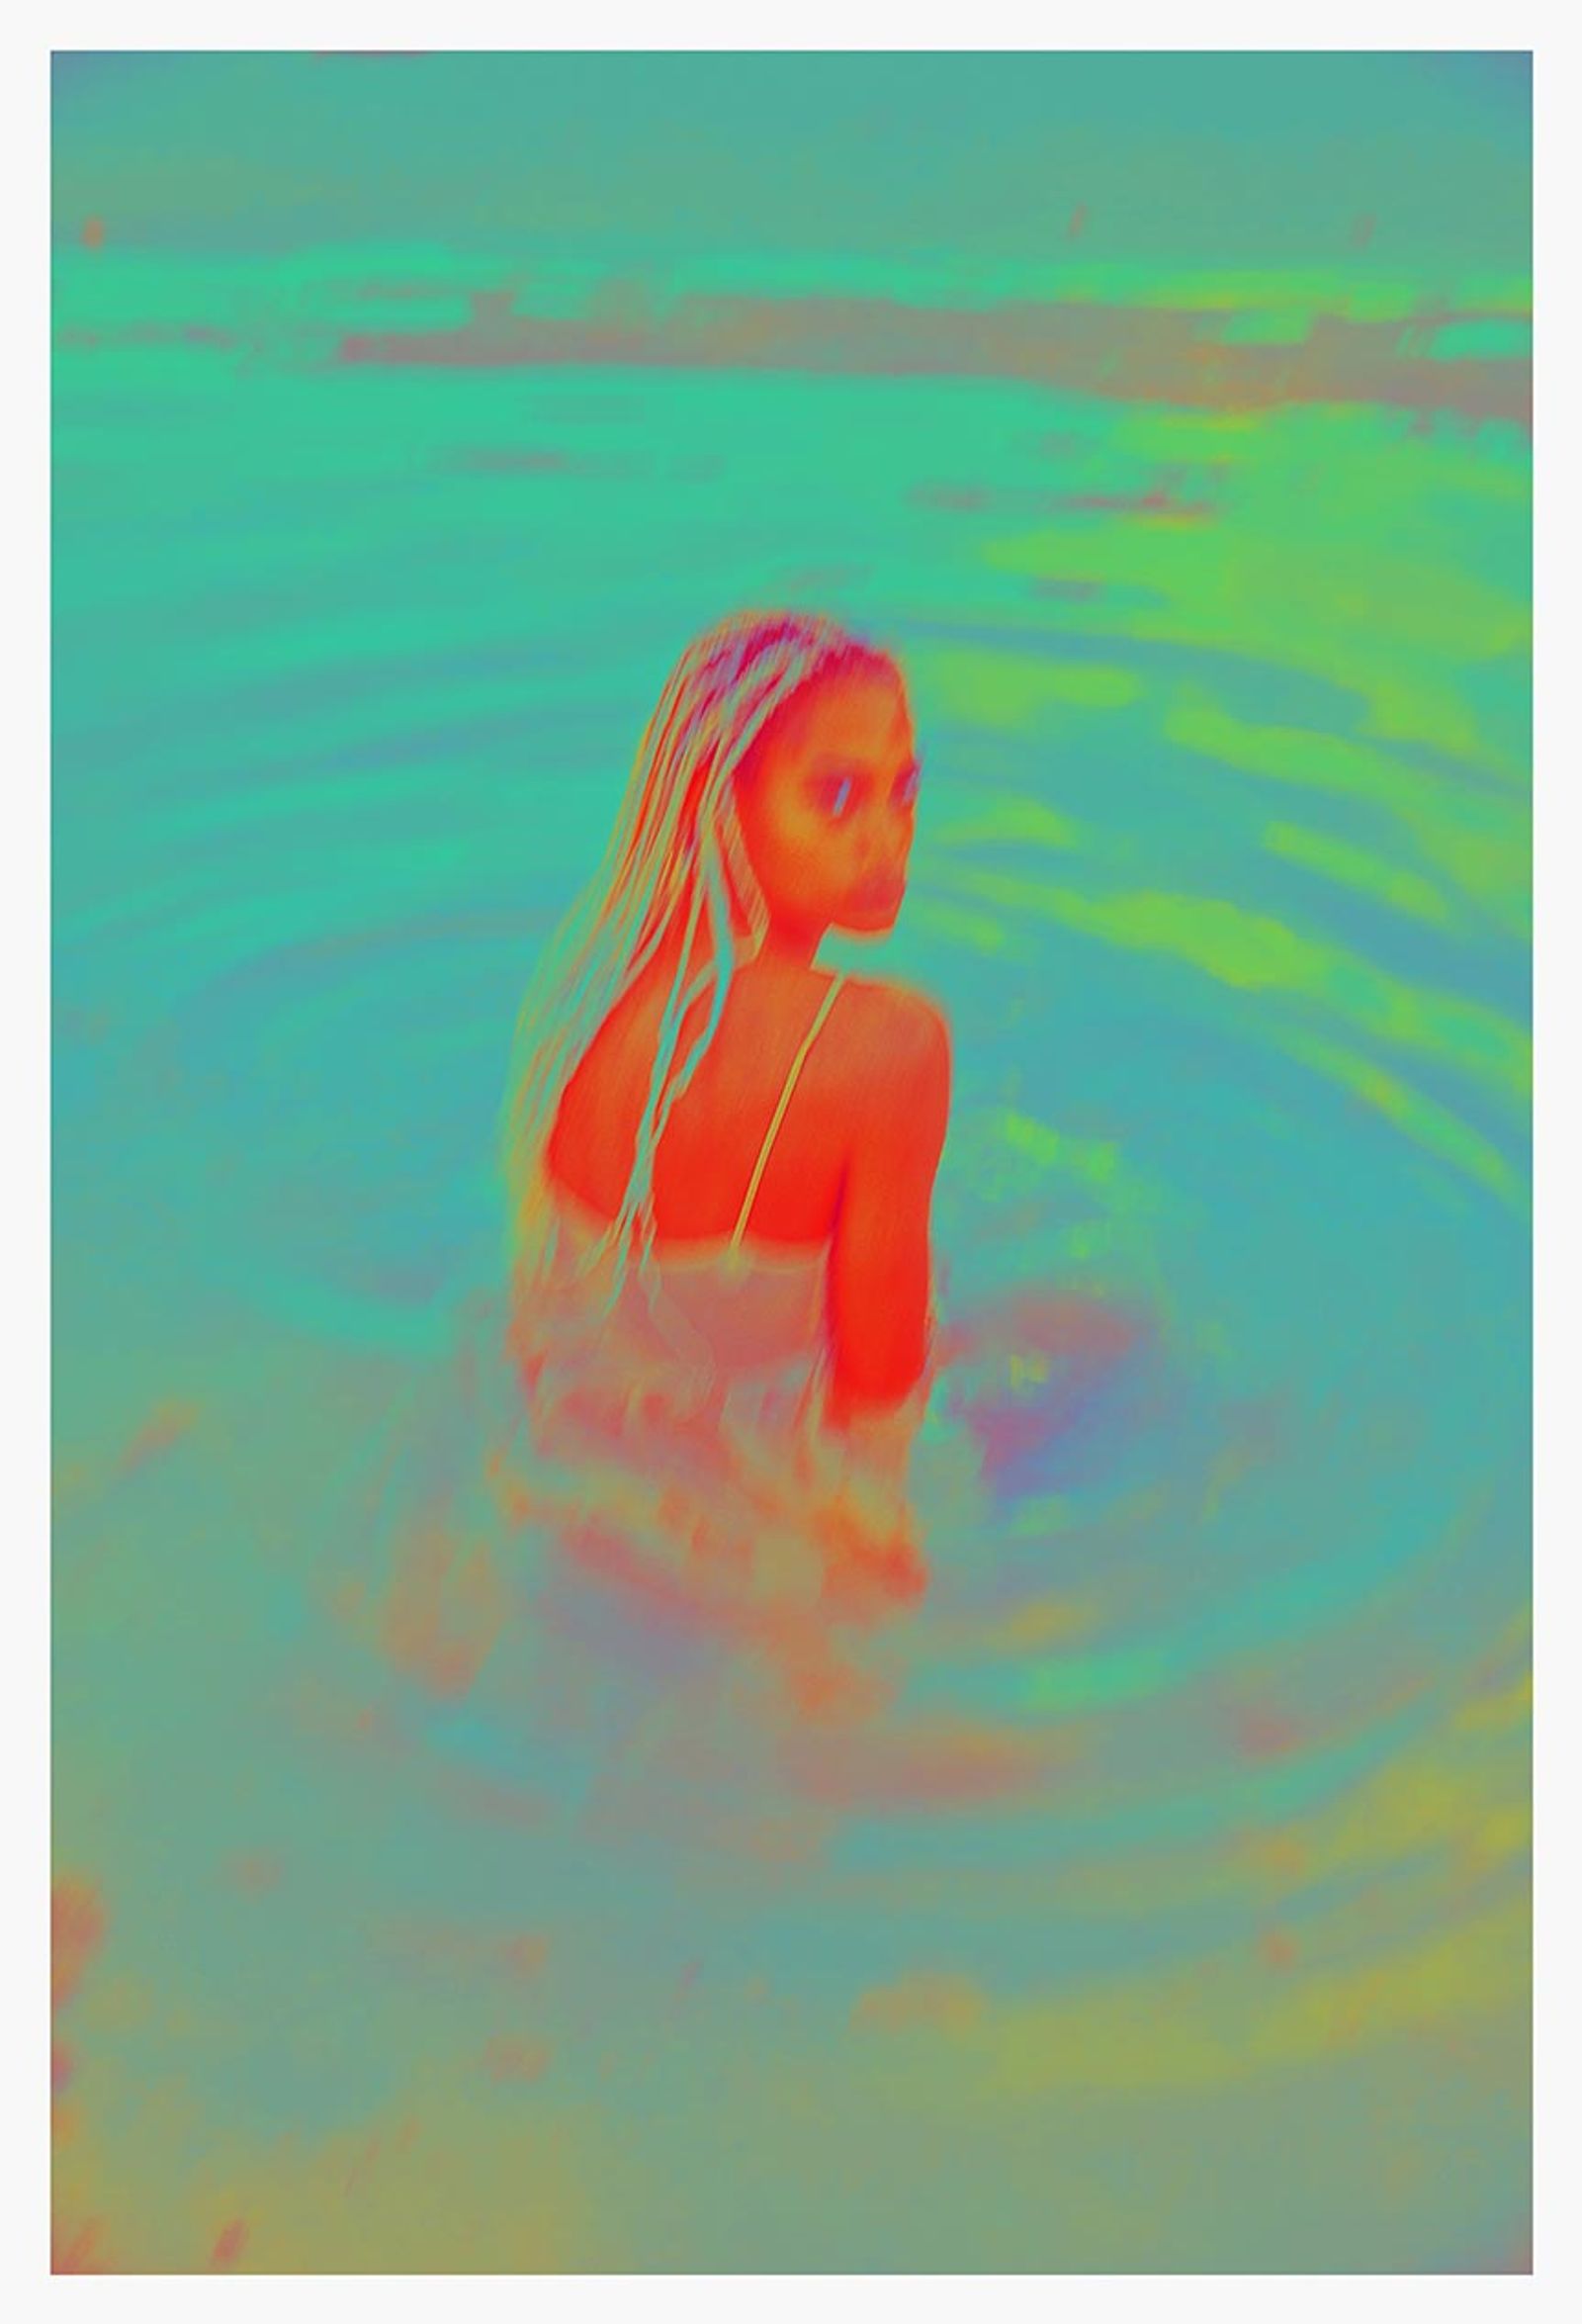 © Meredith Andrews - Image from the Technicolor Dream photography project